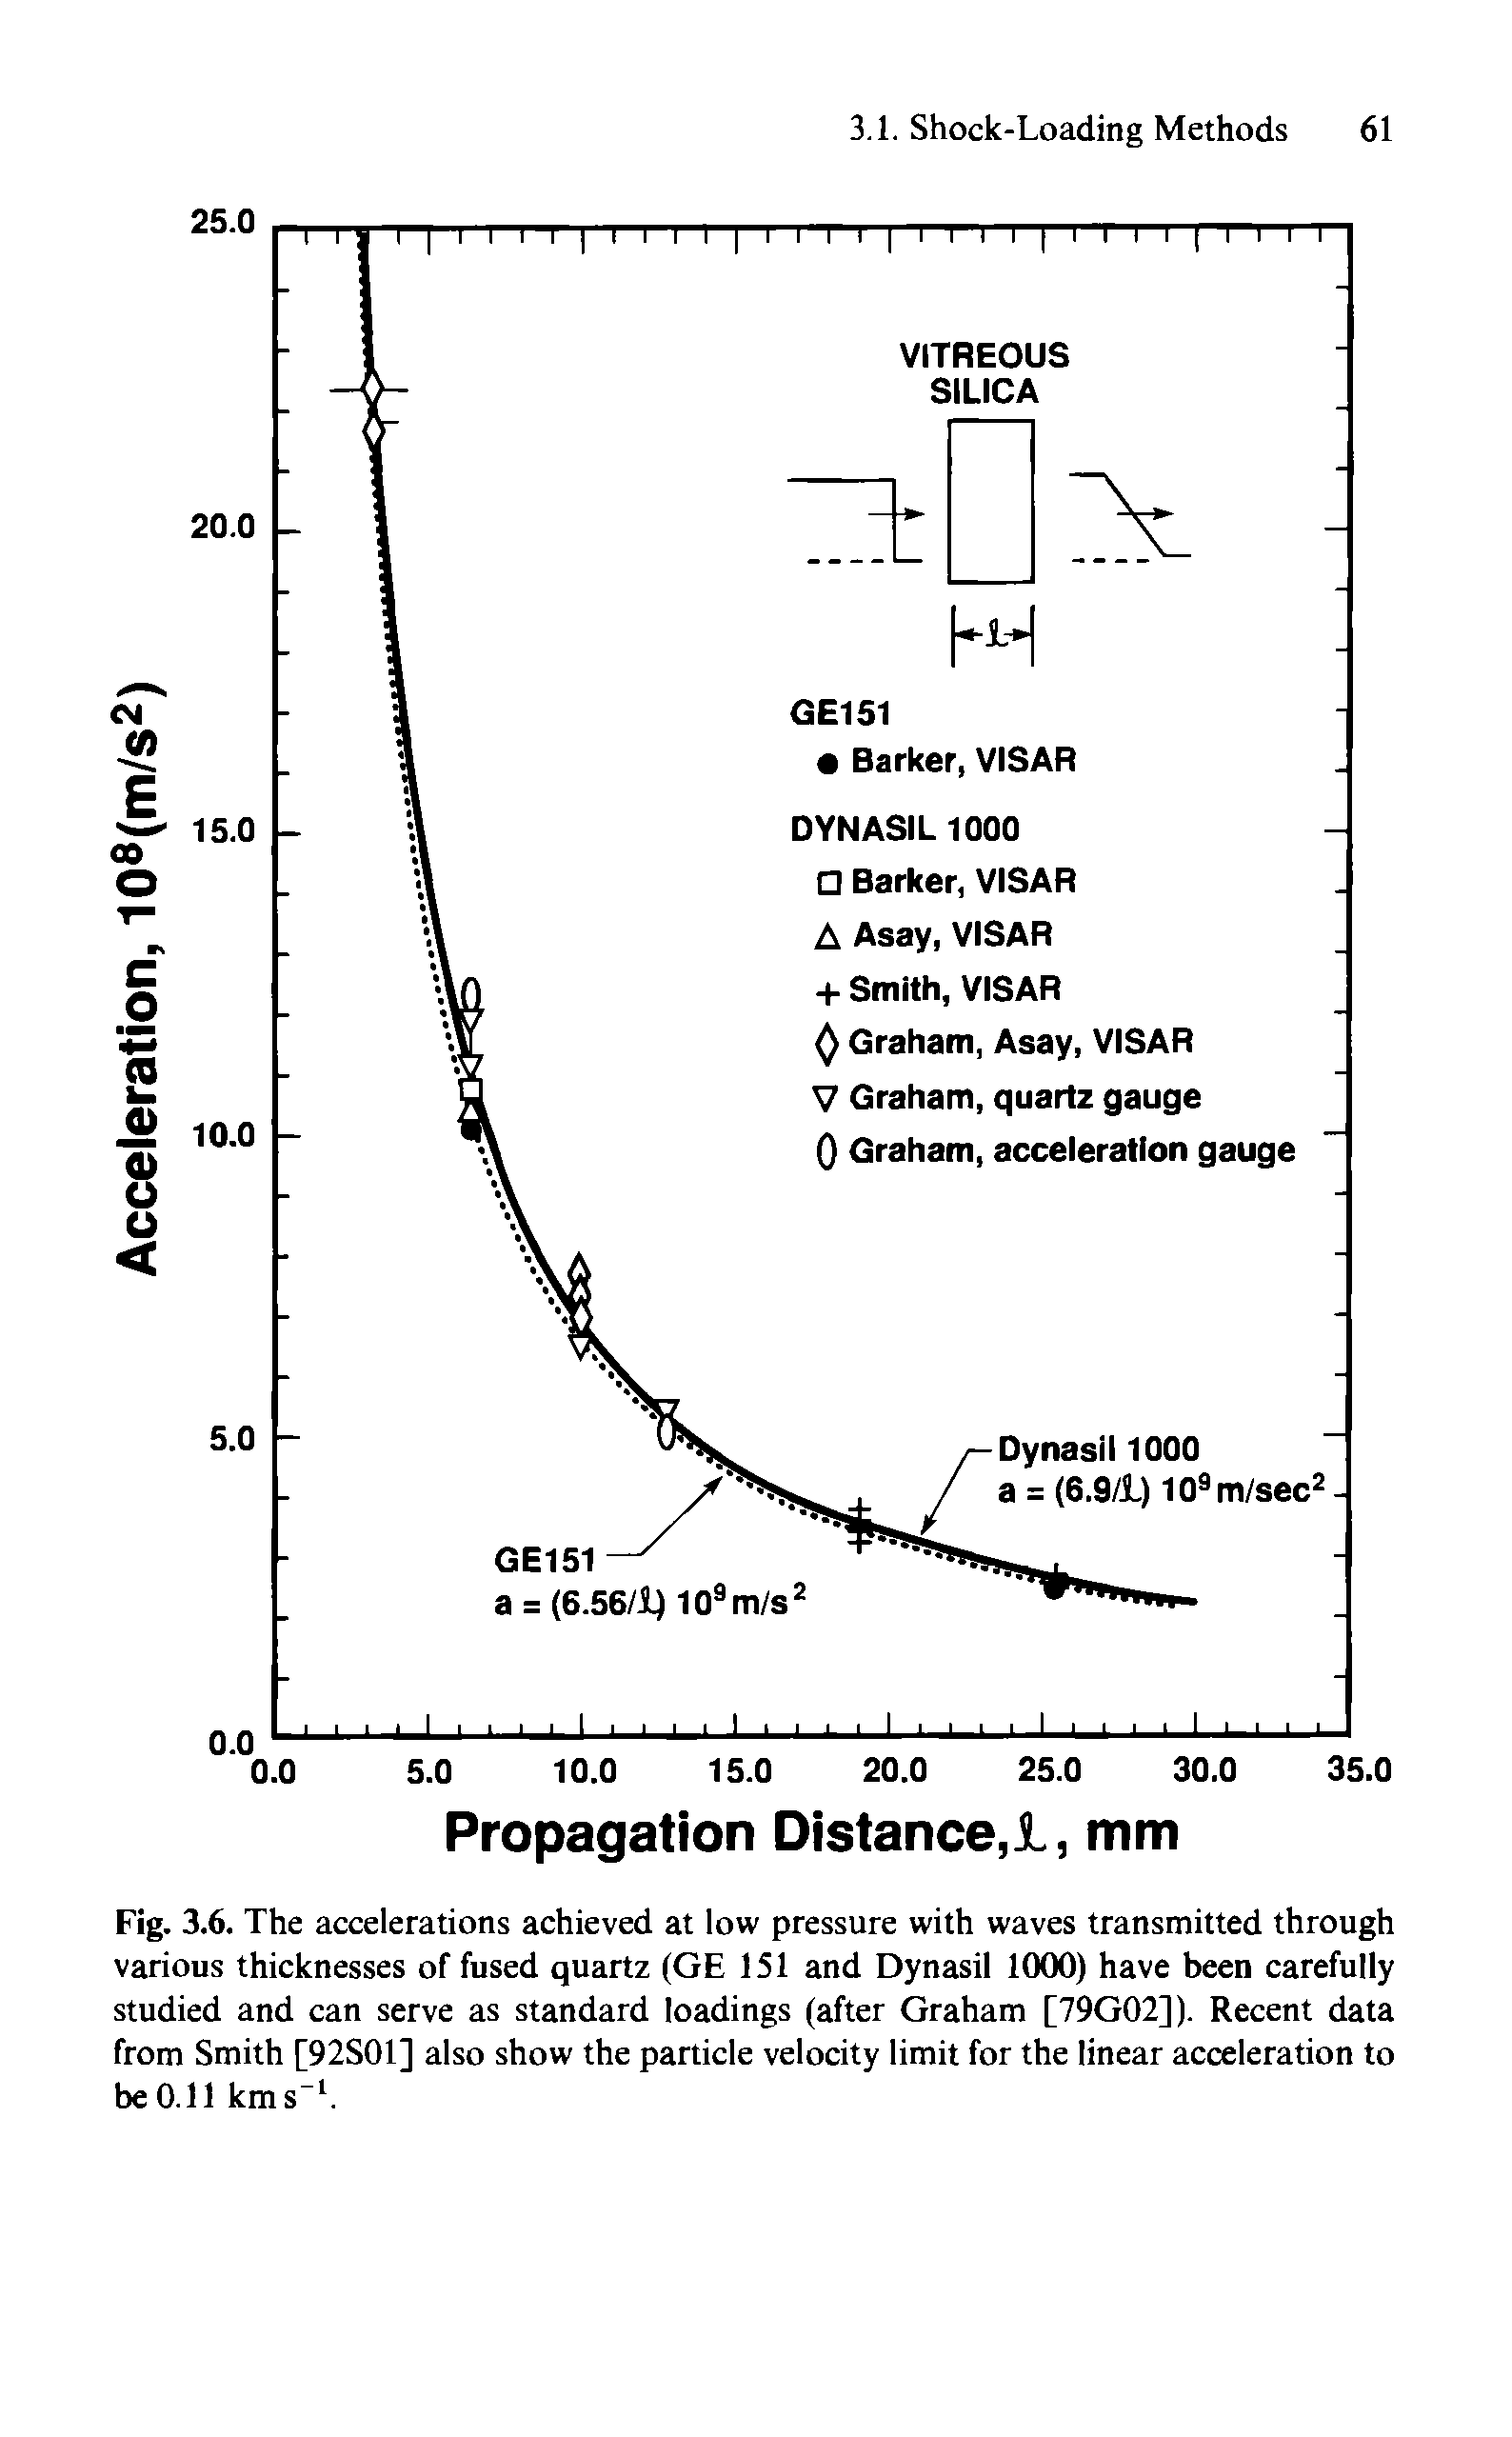 Fig. 3.6. The accelerations achieved at low pressure with waves transmitted through various thicknesses of fused quartz (GE 151 and Dynasil 1000) have been carefully studied and can serve as standard loadings (after Graham [79G02]). Recent data from Smith [92S01] also show the particle velocity limit for the linear acceleration to be 0.11 kms ...